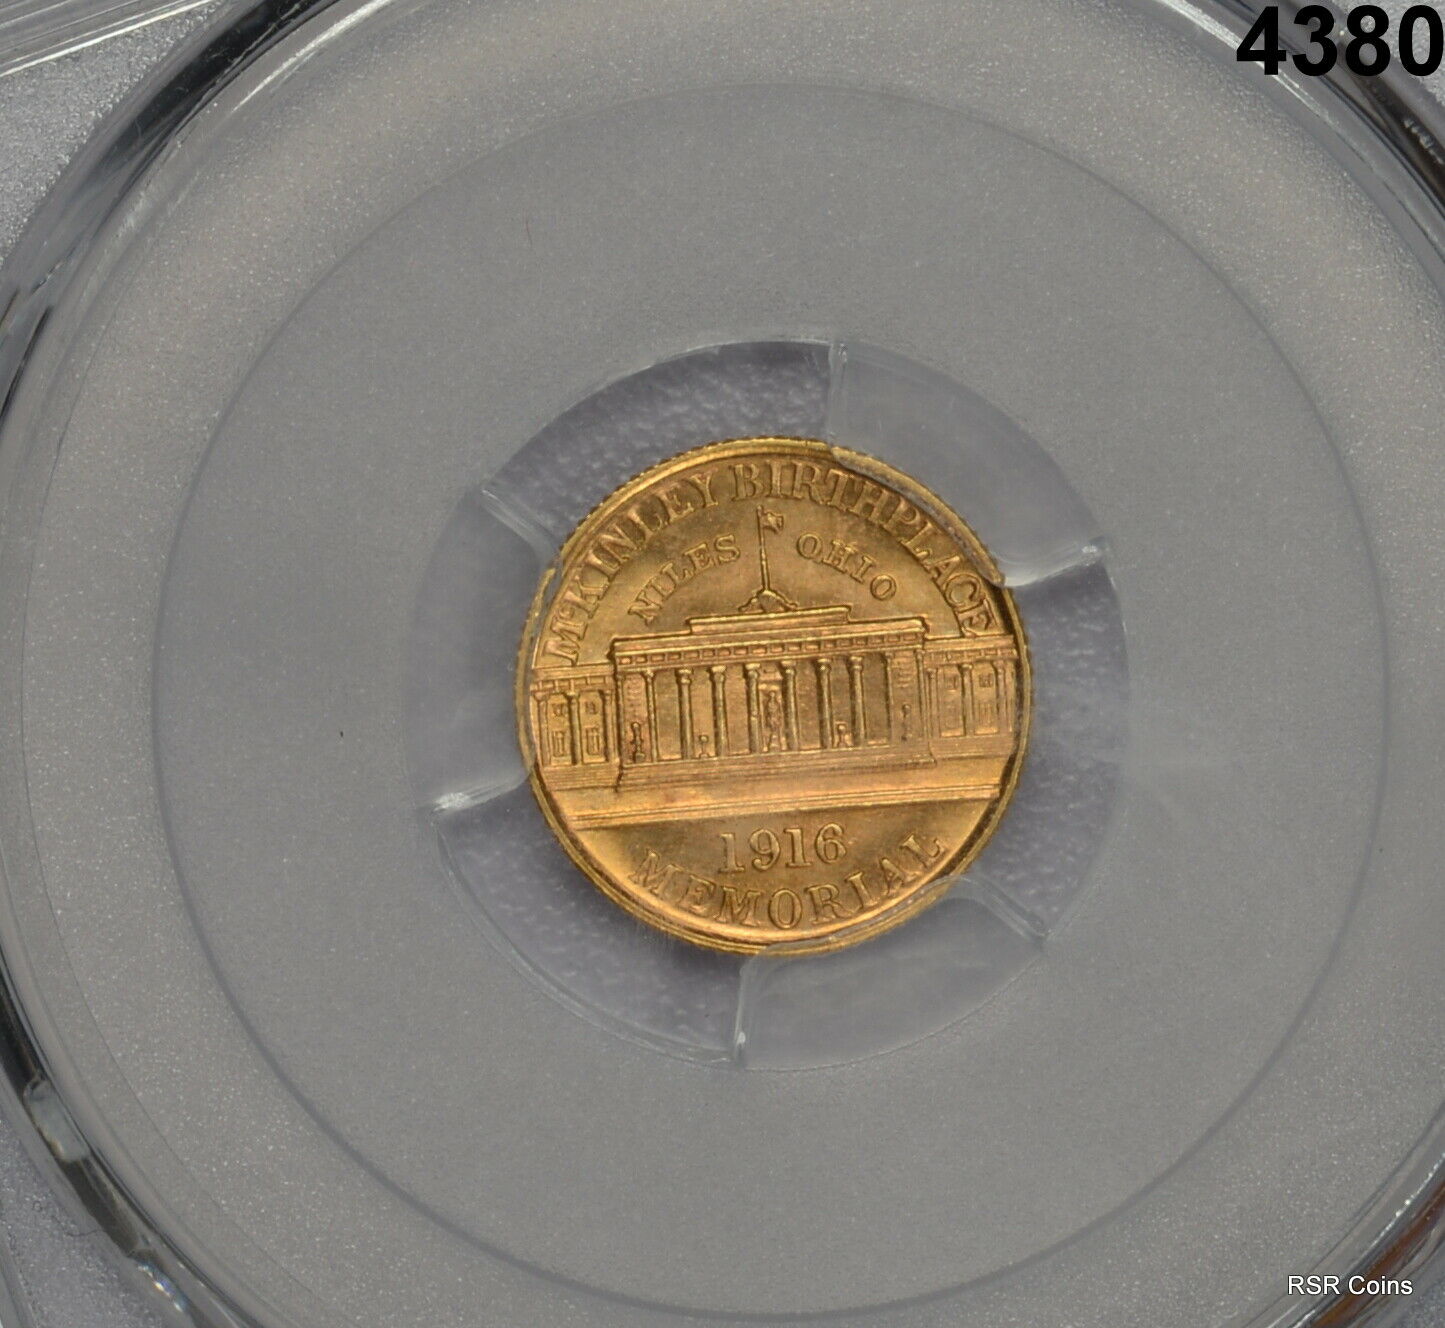 1916 MCKINLEY $1 GOLD COMM PCGS CERTIFIED MS65 FLASHY LUSTER15,000 MINTAGE #4380